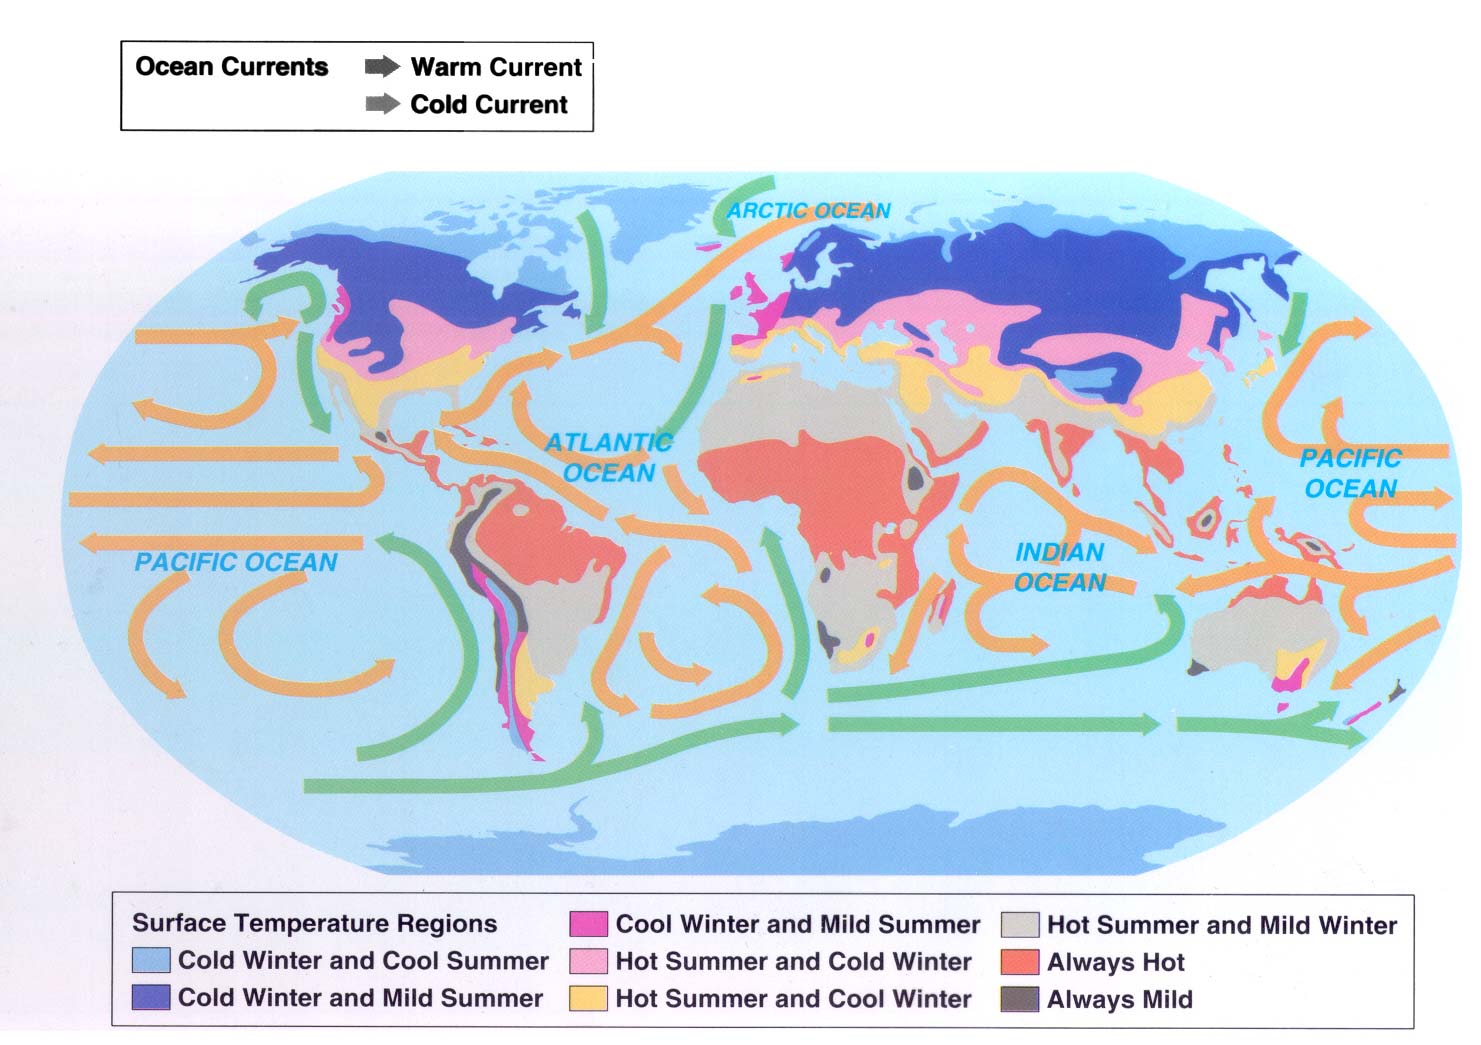 World Surface Temperature and Currents Map